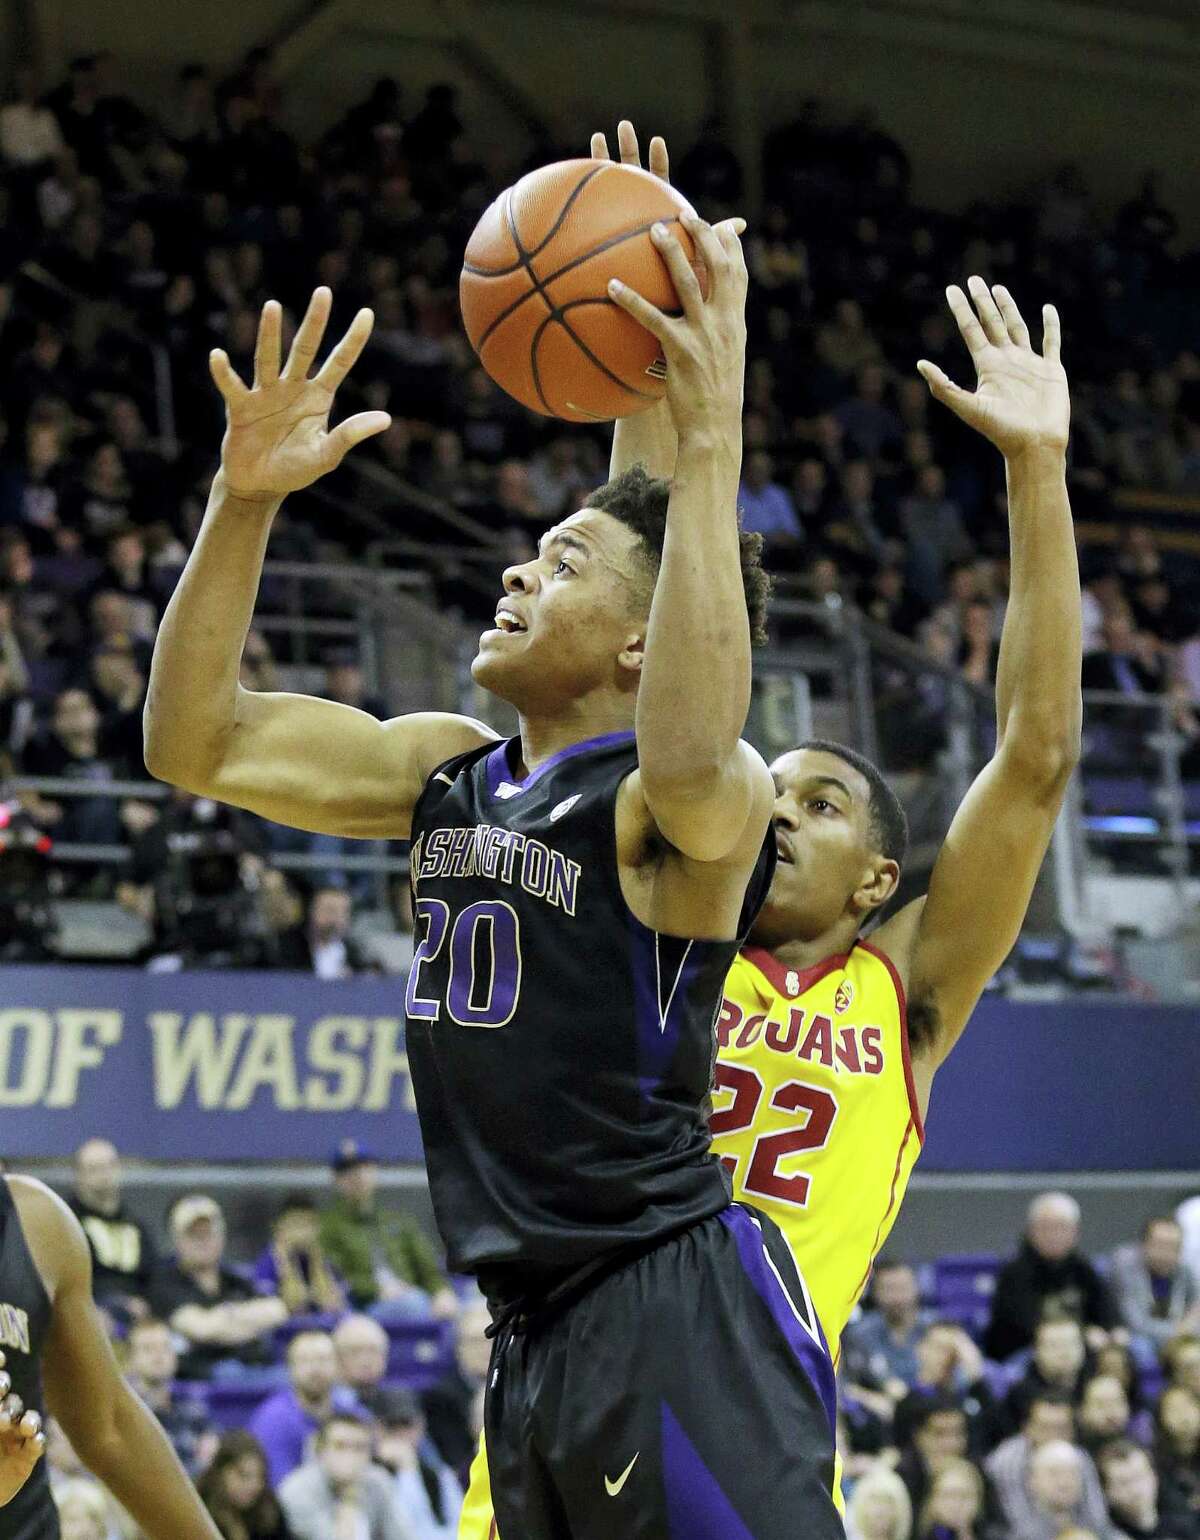 Washington’s Markelle Fultz is expected to be taken by the 76ers with the No. 1 pick in Thursday’s NBA draft.